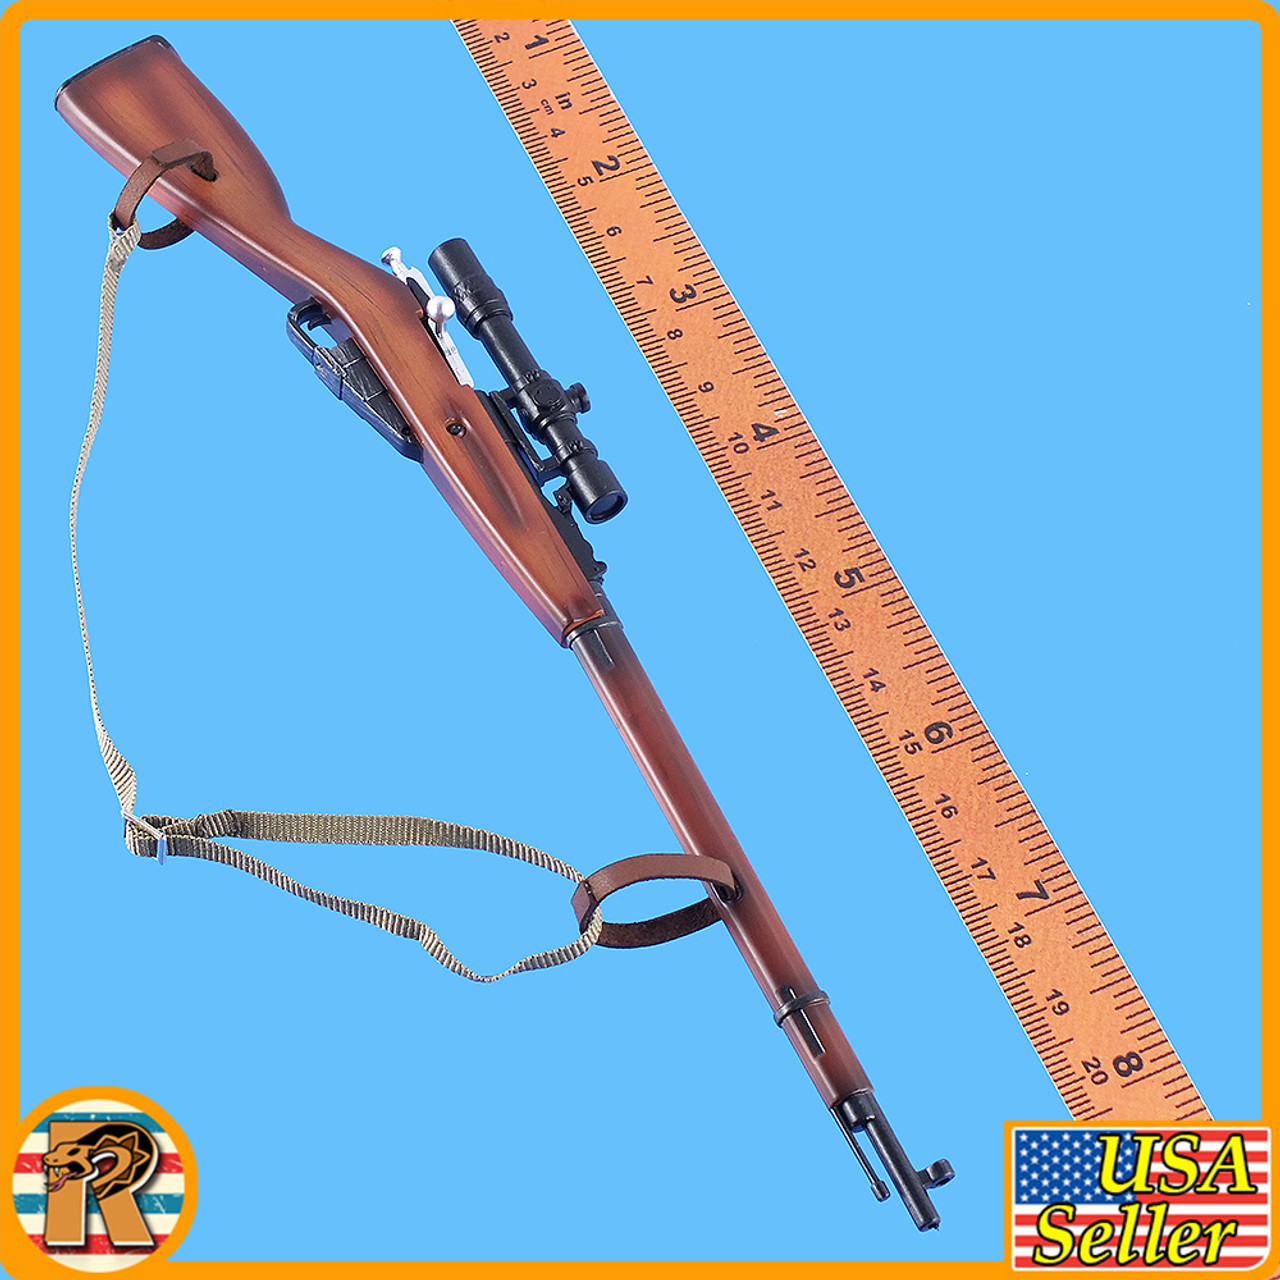 Finnish Soldier WWII - Sniper Rifle - 1/6 Scale -